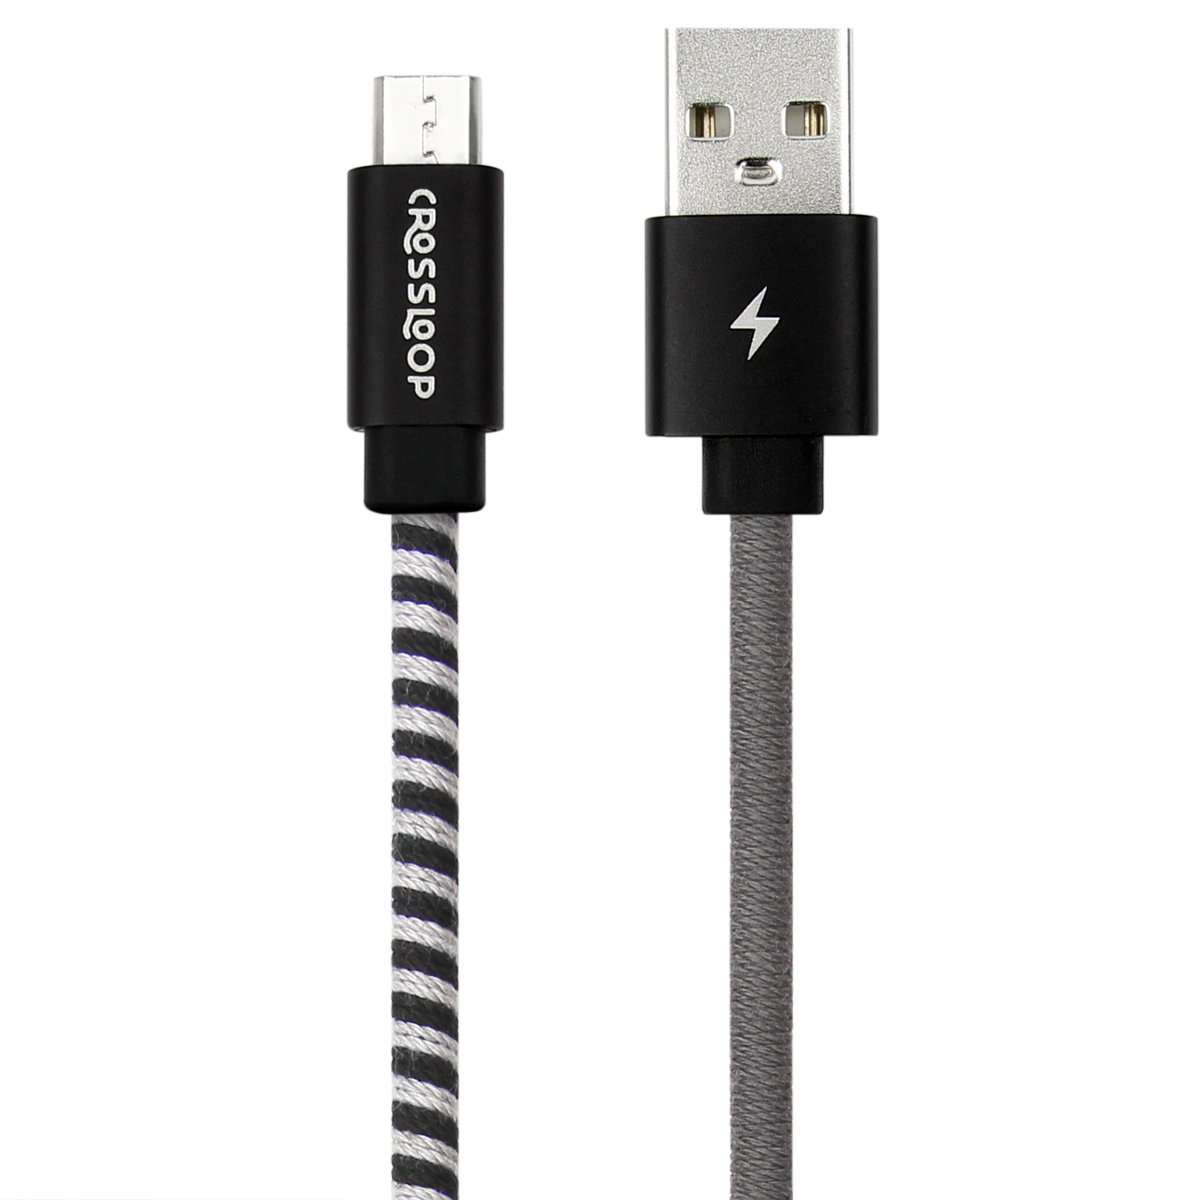 Micro USB fast charging cable in black & grey